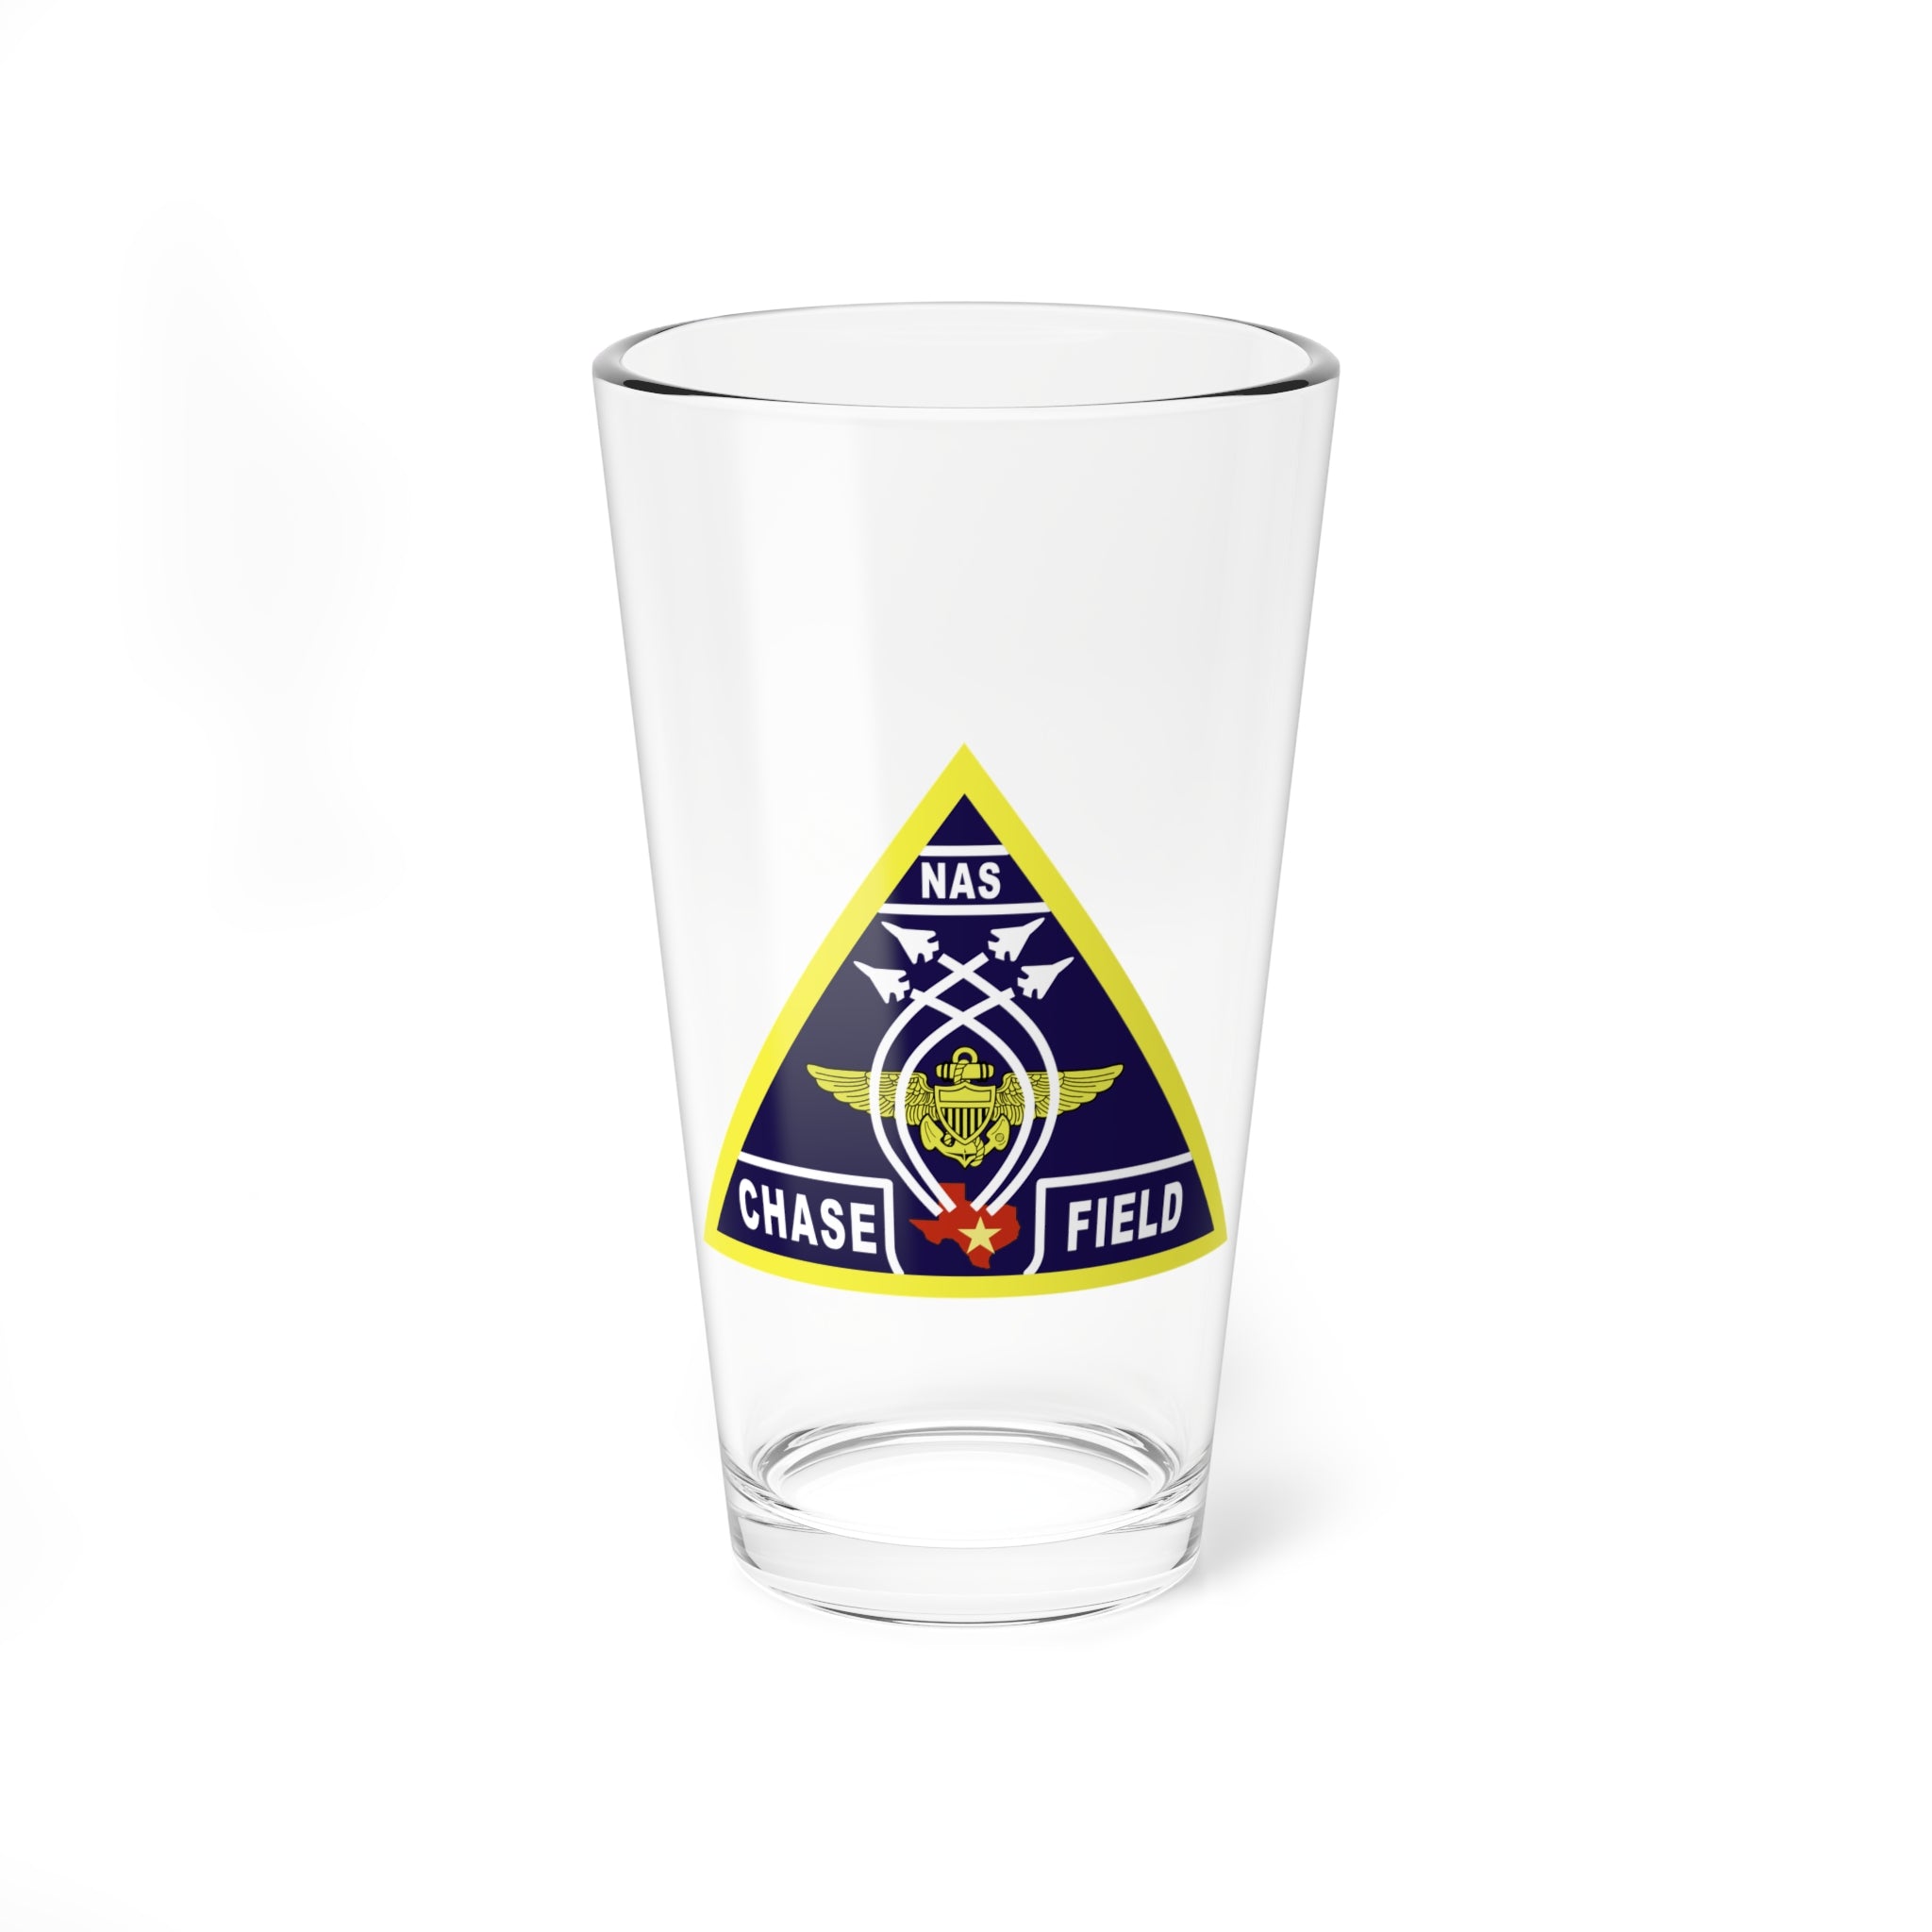 Naval Air Station Chase Field (Beeville) Pint Glass